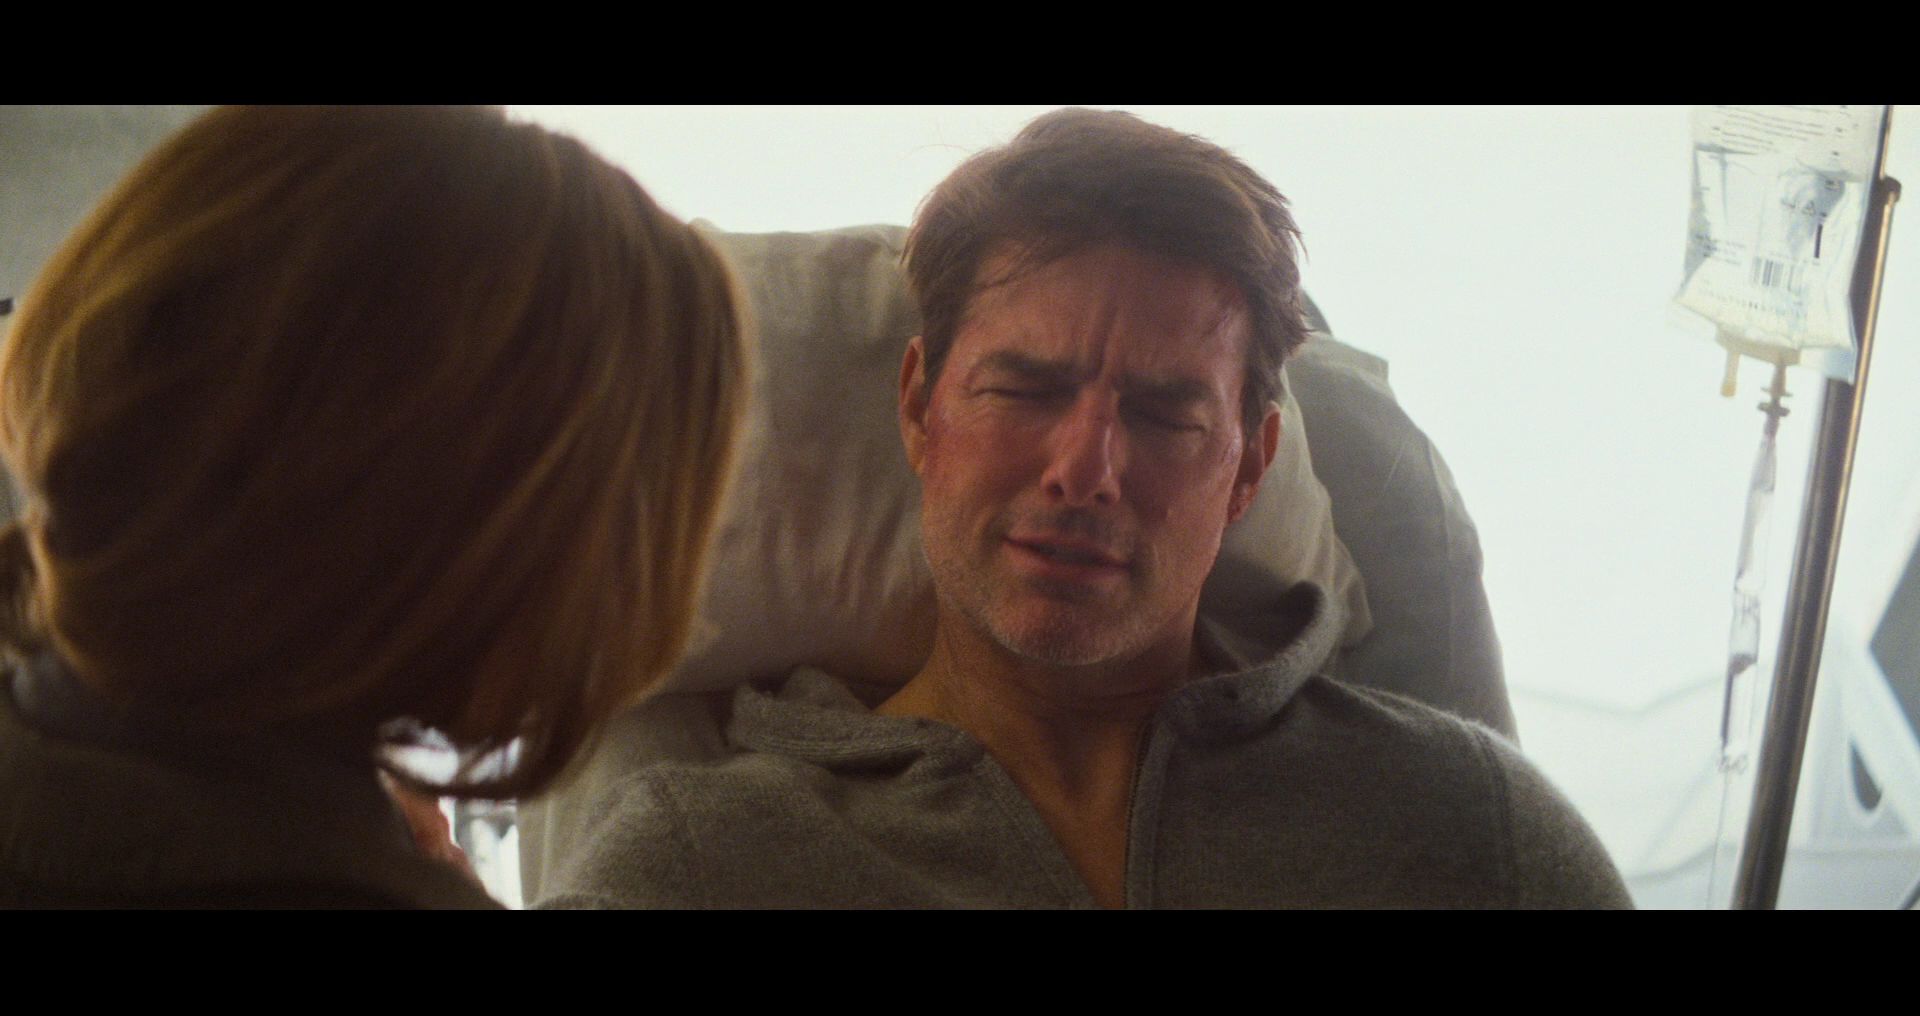 Mission-Impossible-Fallout-3929.jpg